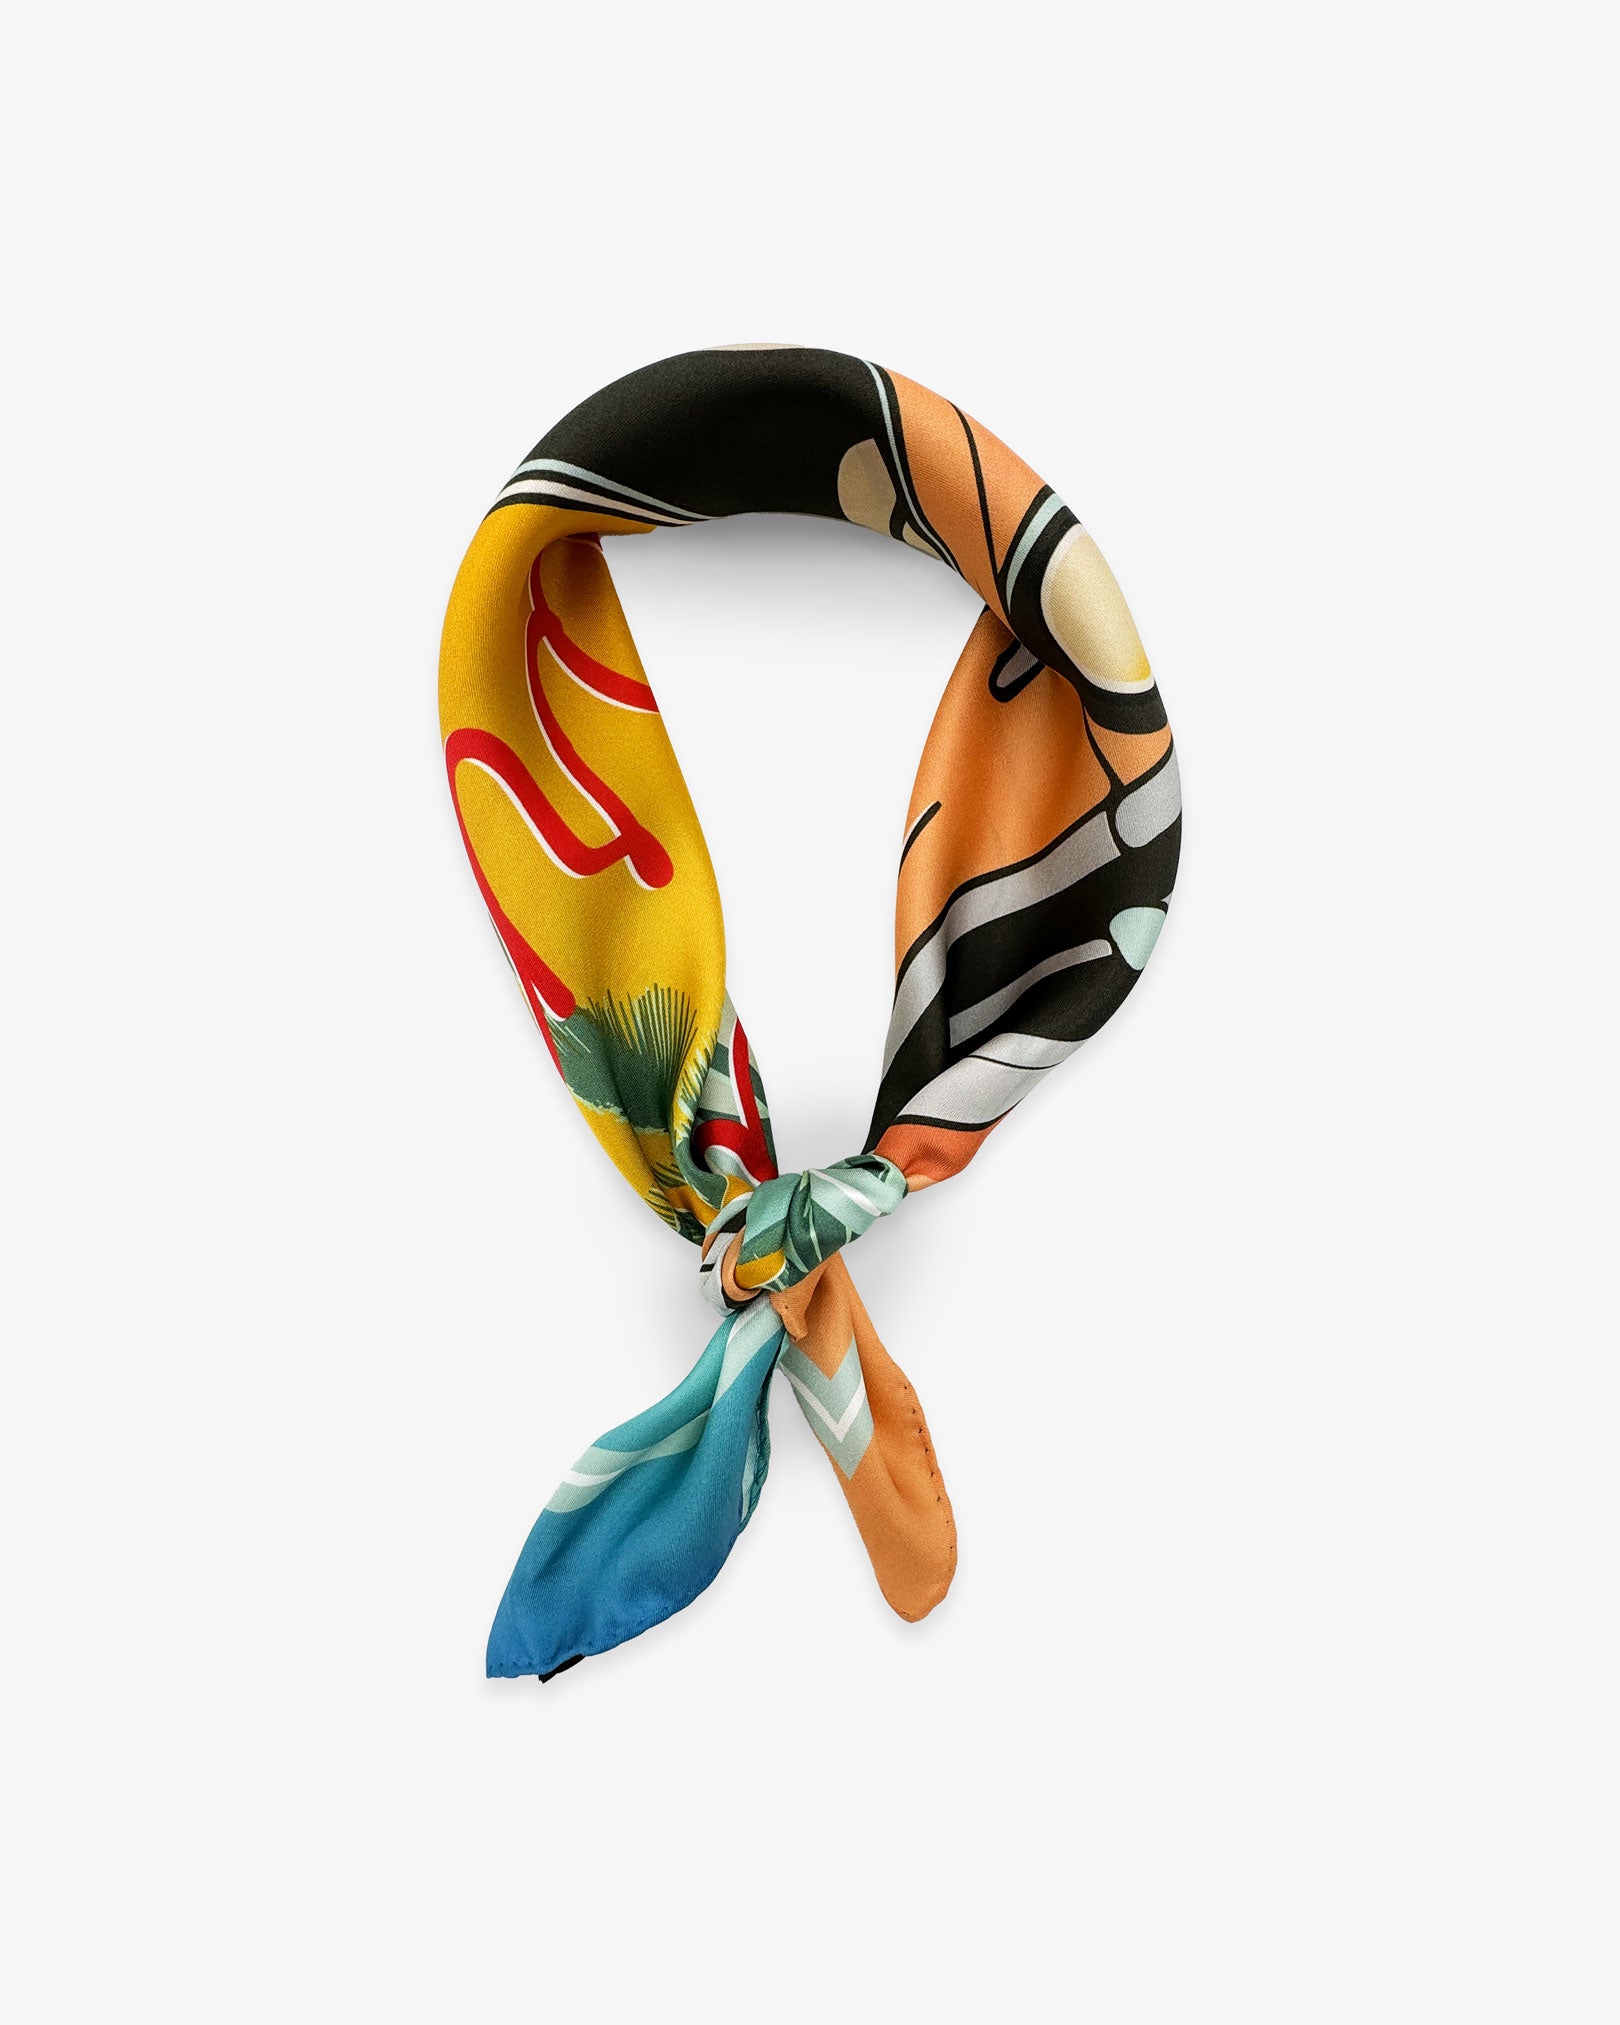 The 'Sunset Ride' pink silk neckerchief SOHO Scarves knotted and looped against a white background.